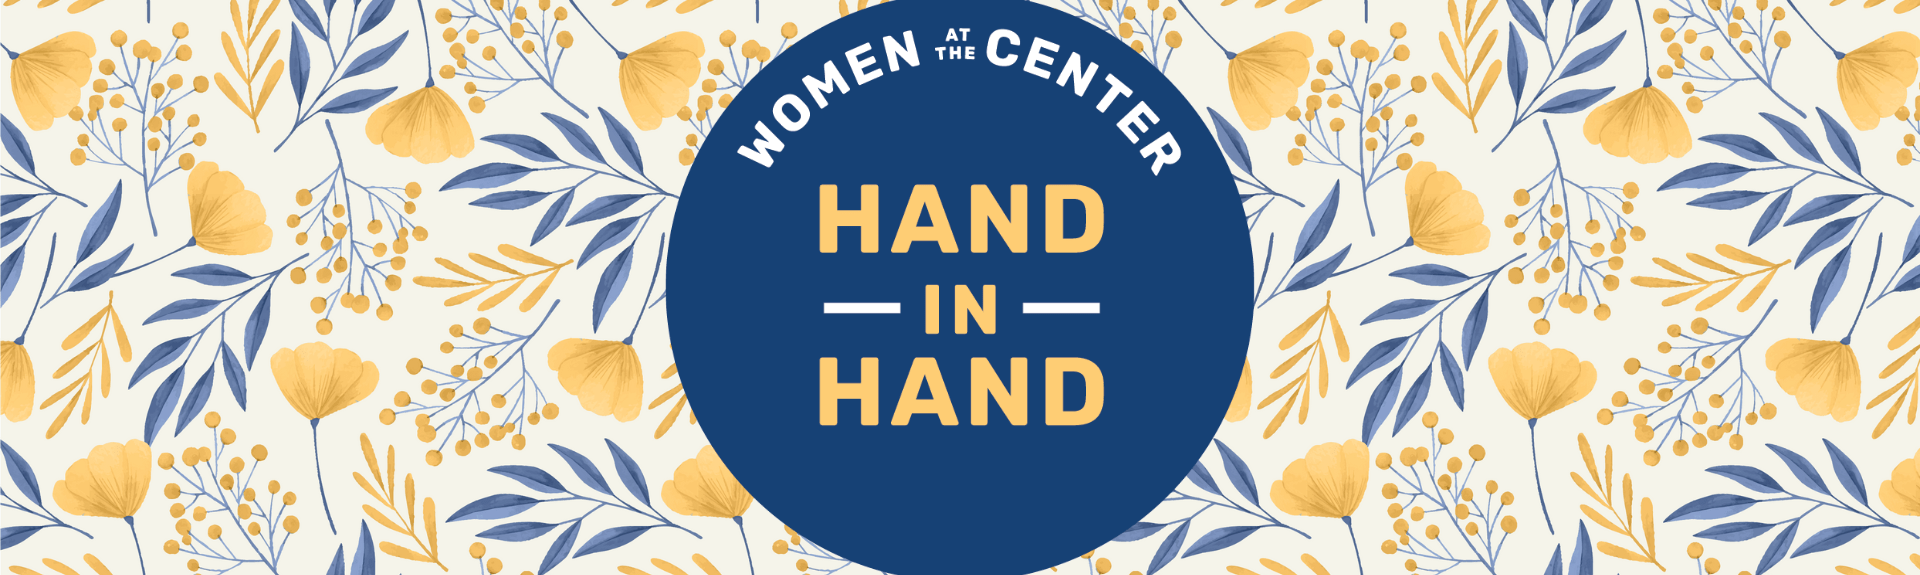 Women at the Center: Hand in Hand